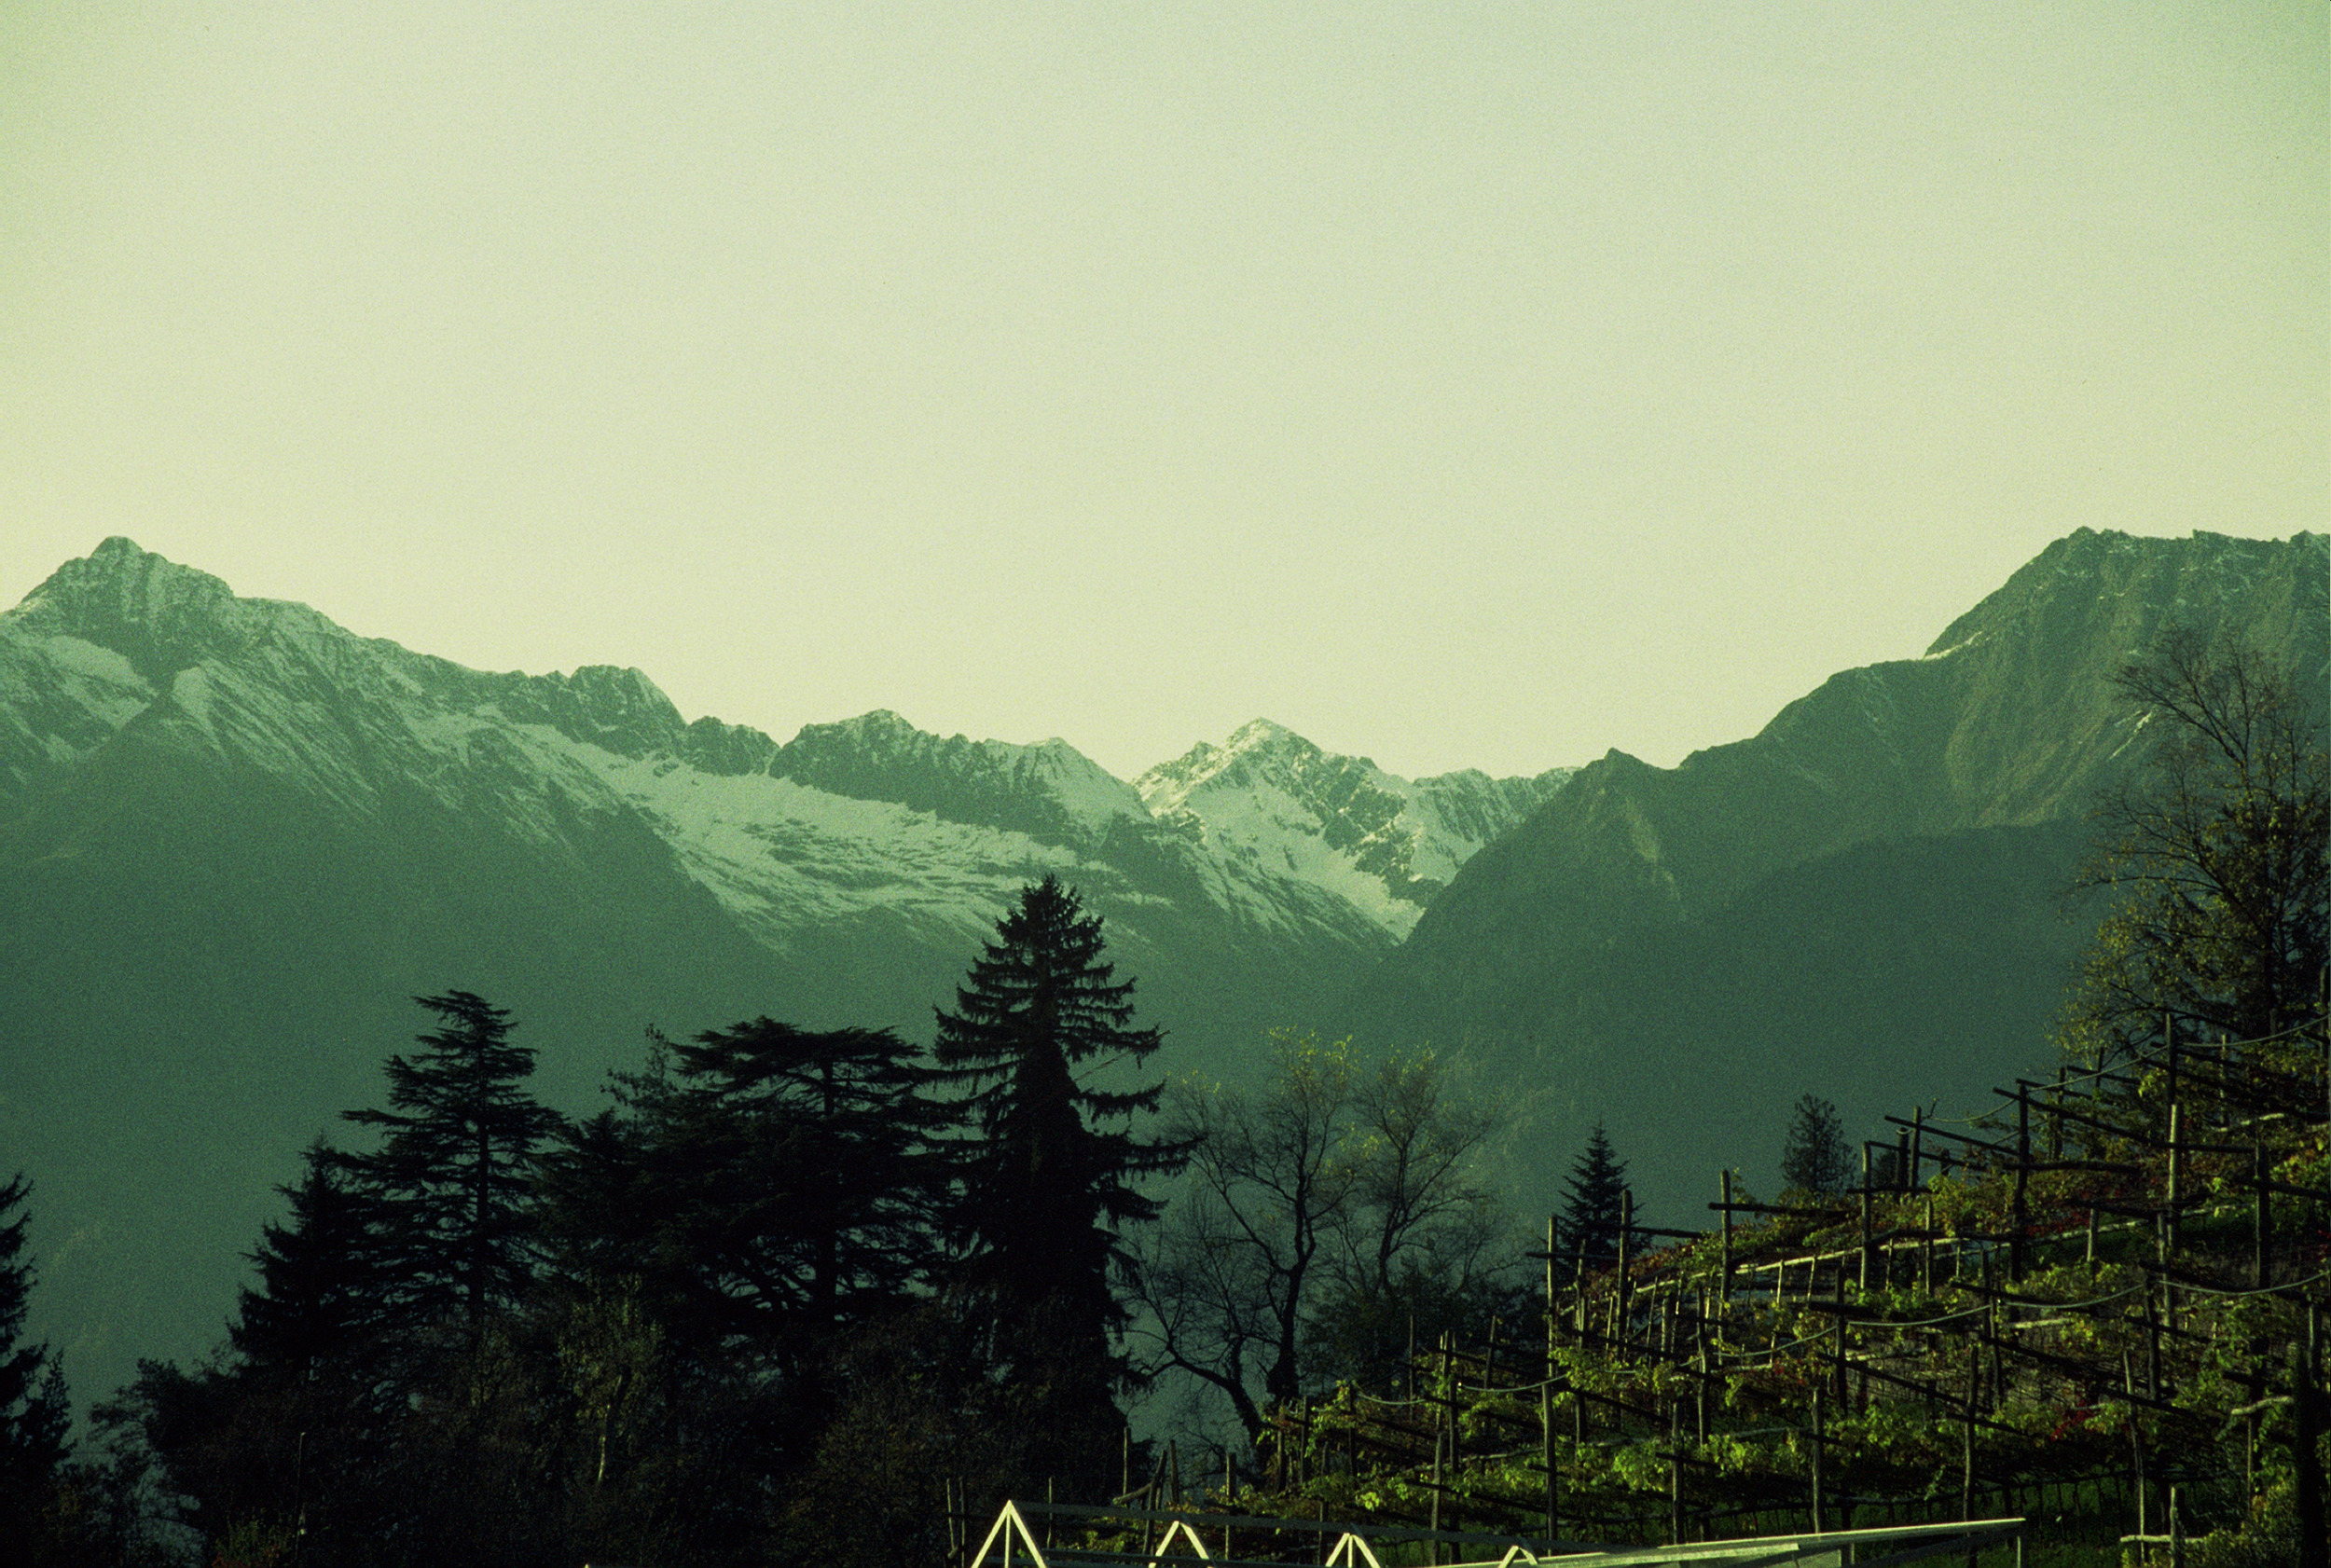 View of the Alps from the Garden.jpg